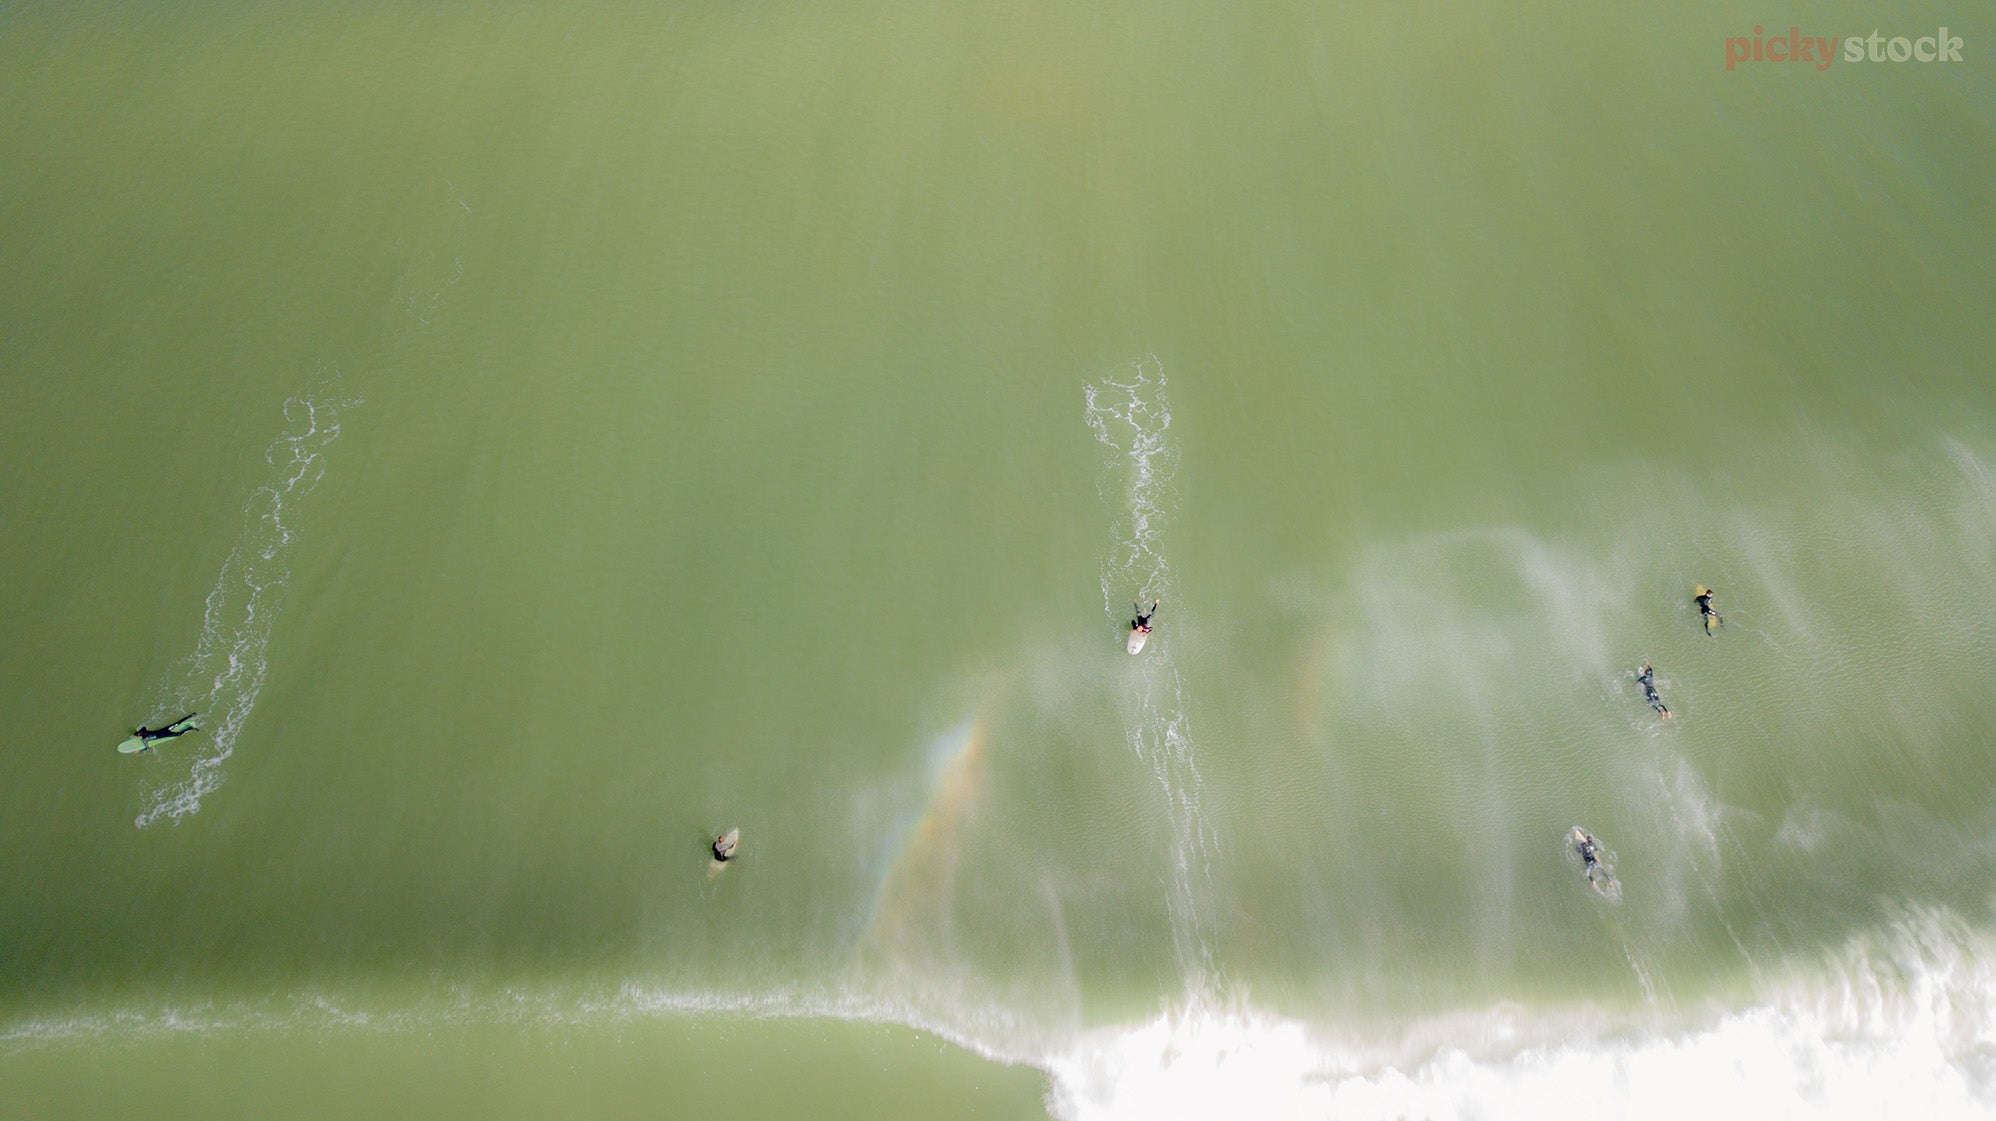 Six surfers on NZ waves, seen from above.